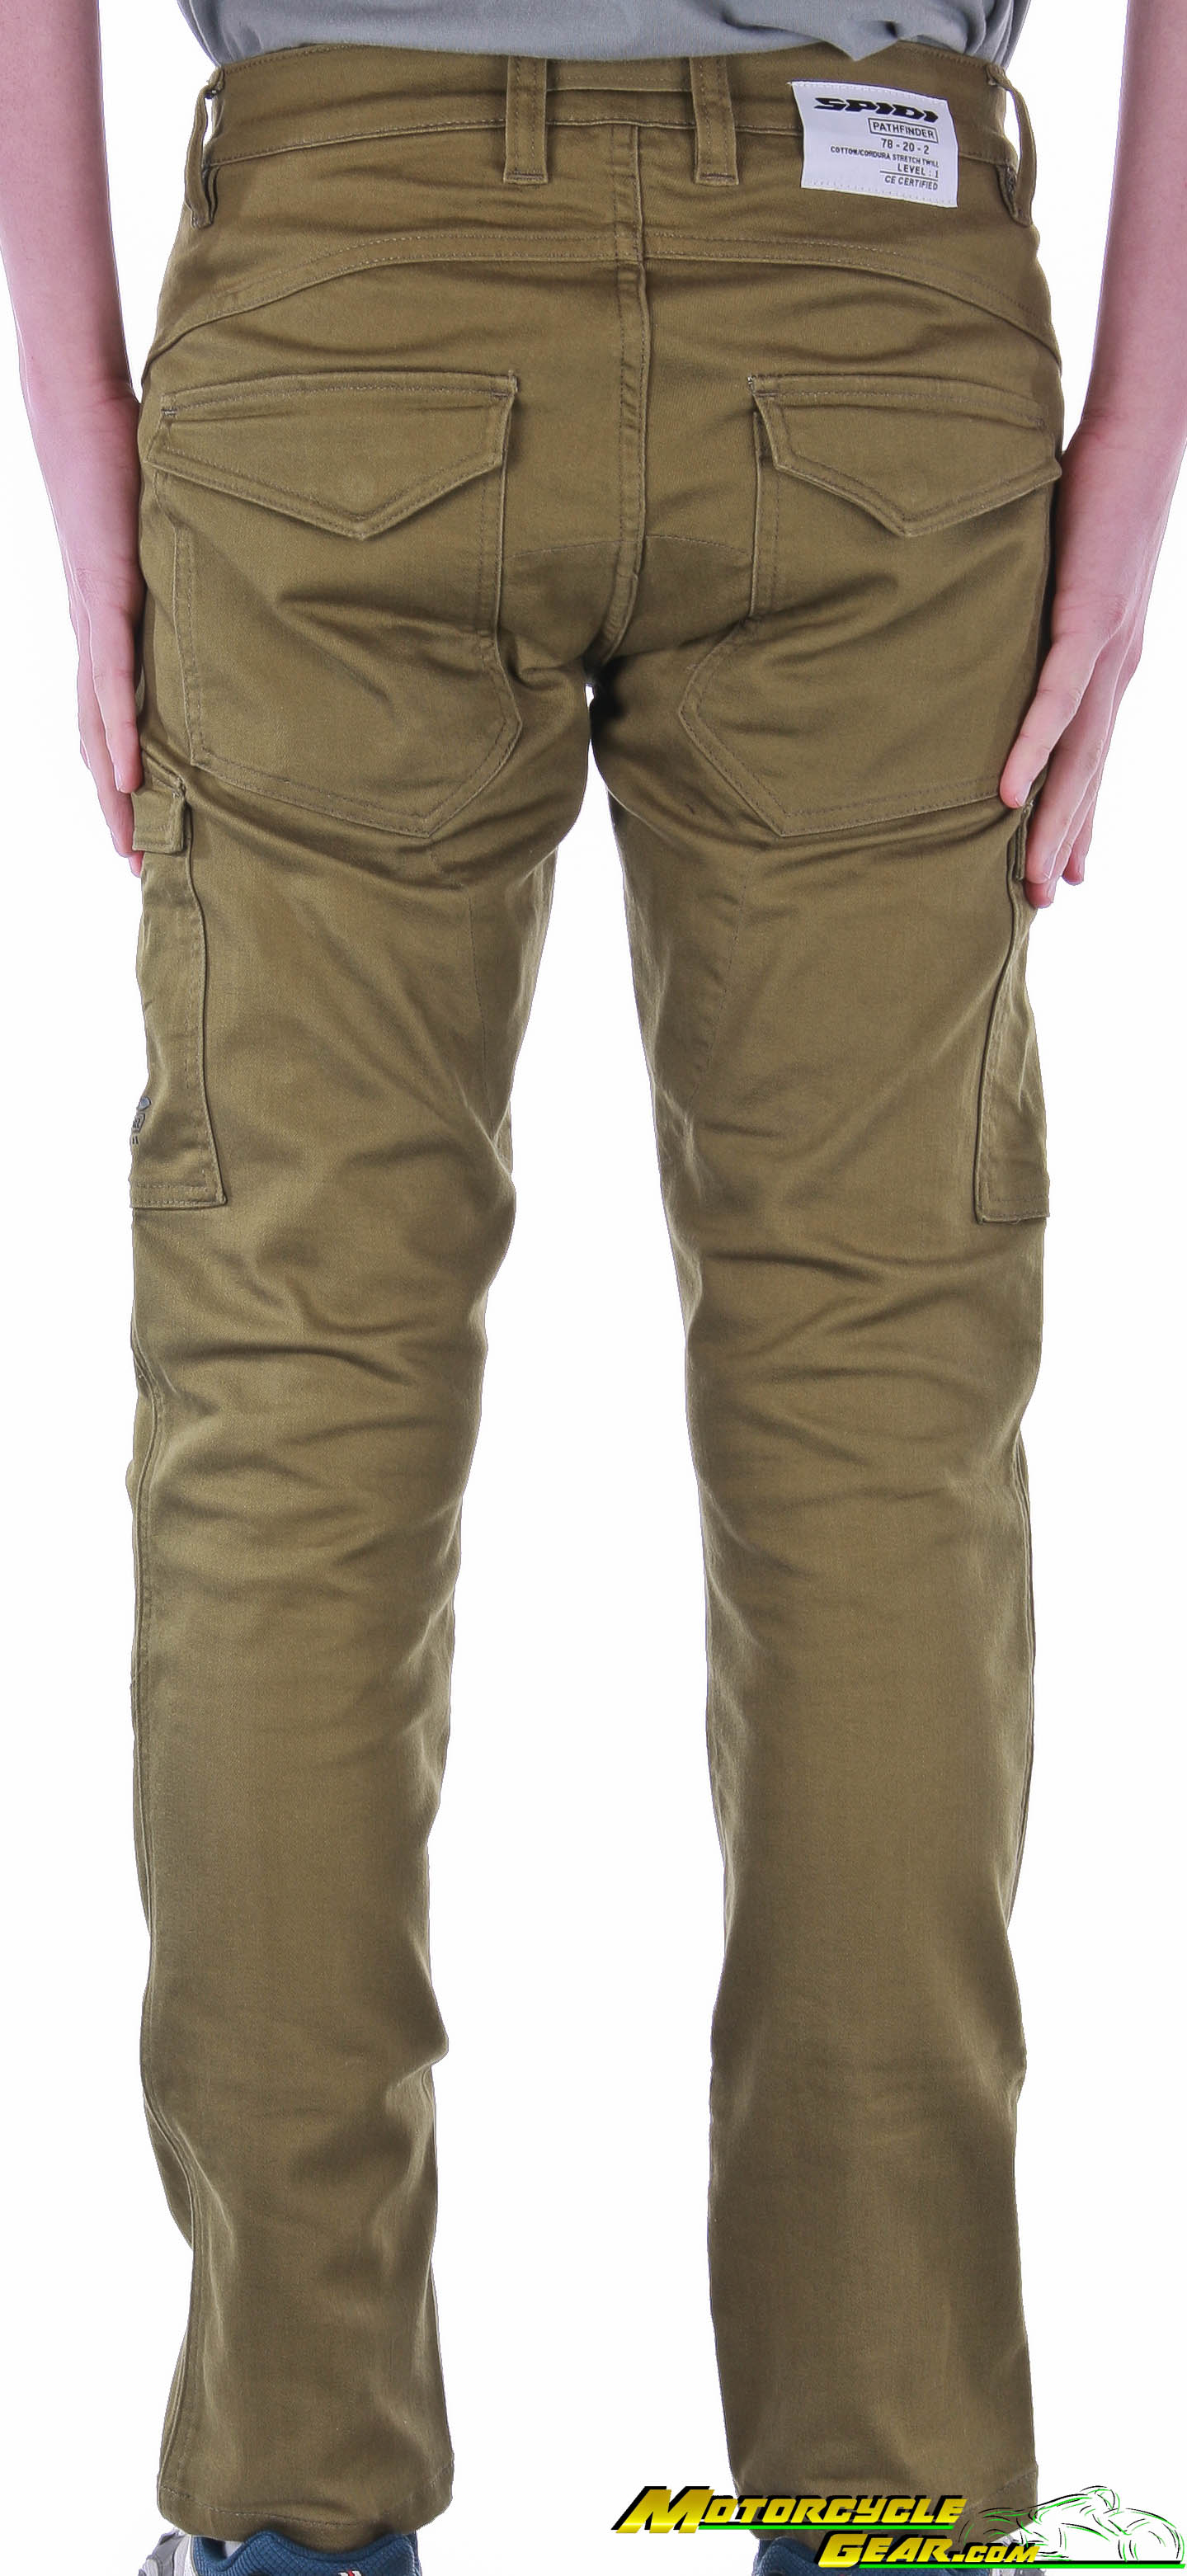 Viewing Images For Spidi Pathfinder Cargo Pants :: MotorcycleGear.com